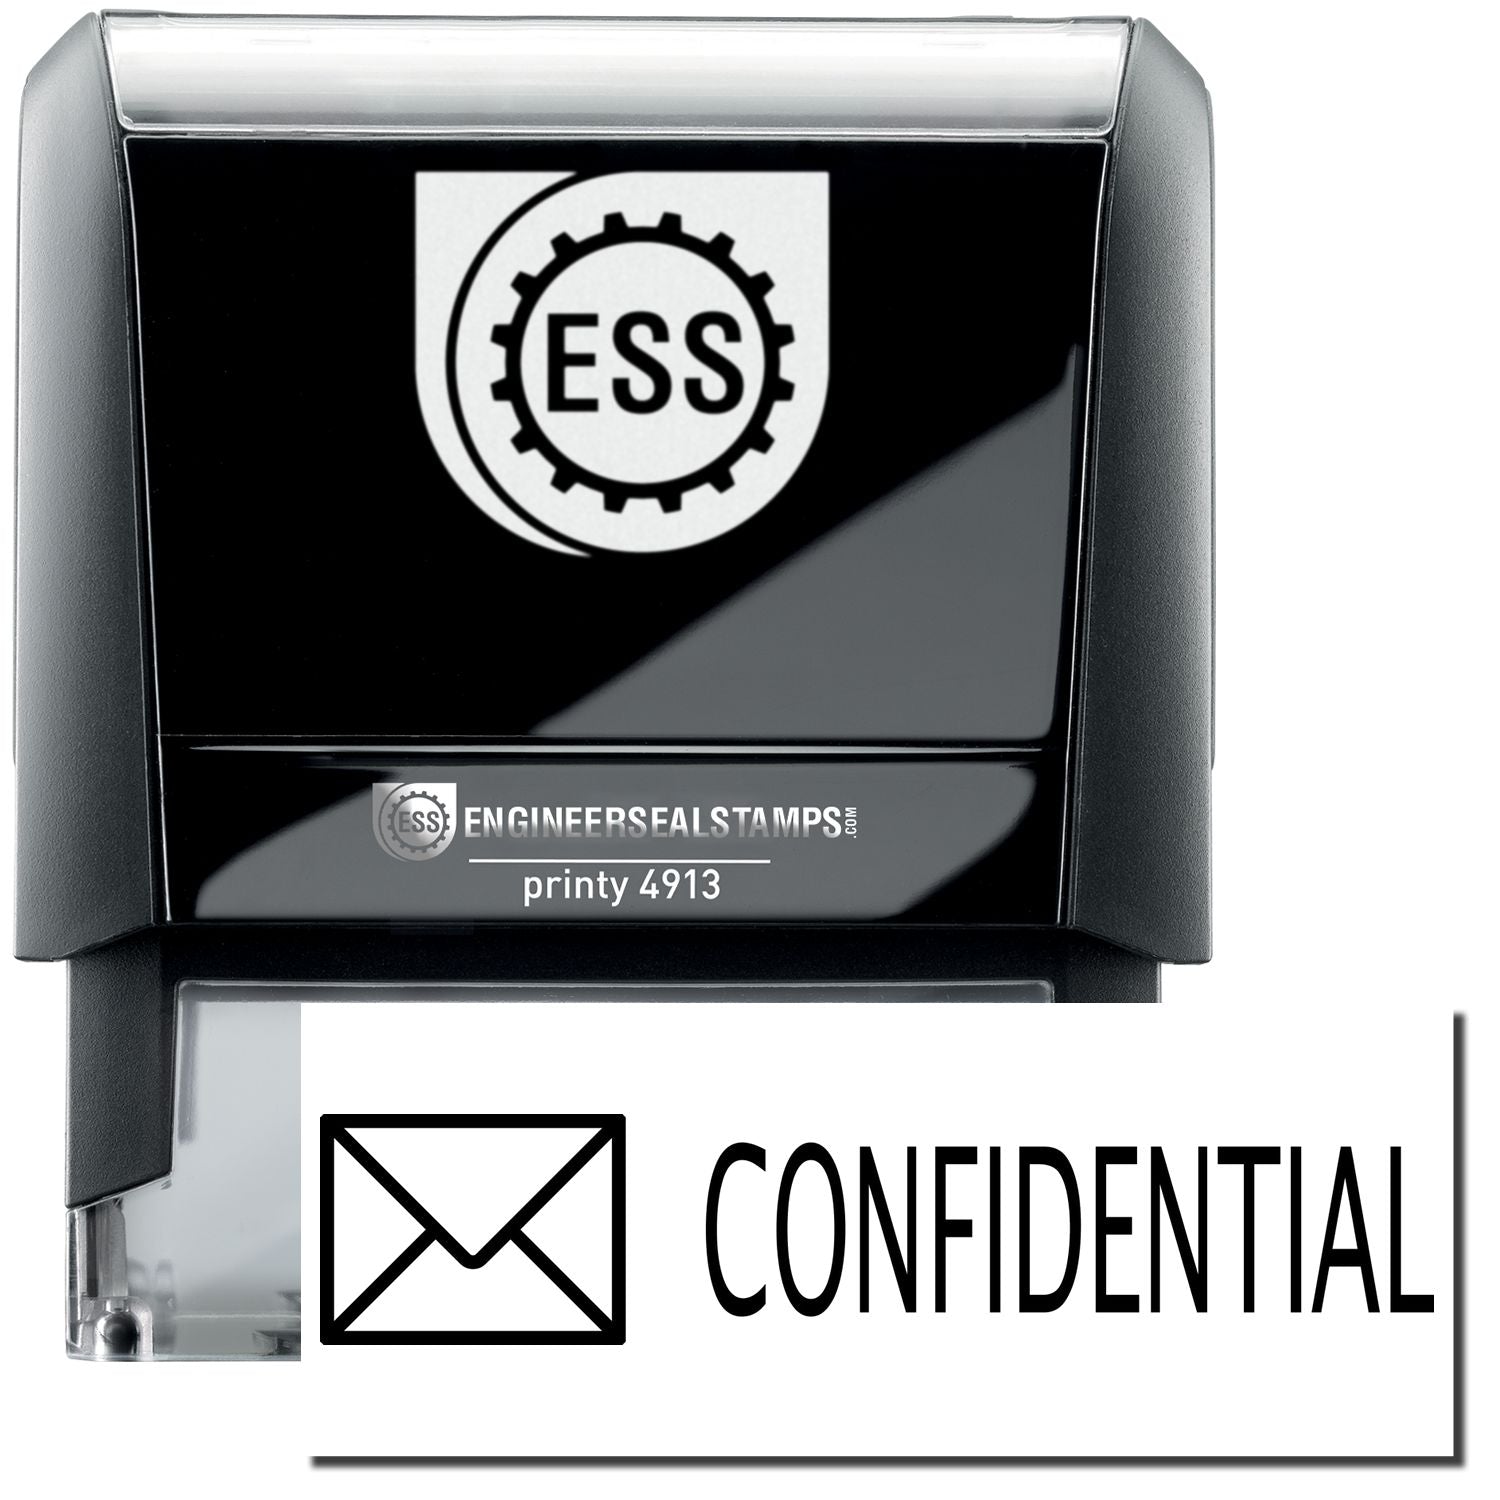 A self-inking stamp with a stamped image showing how the text "CONFIDENTIAL" in a large font with an image of an envelope on the left side is displayed after stamping.